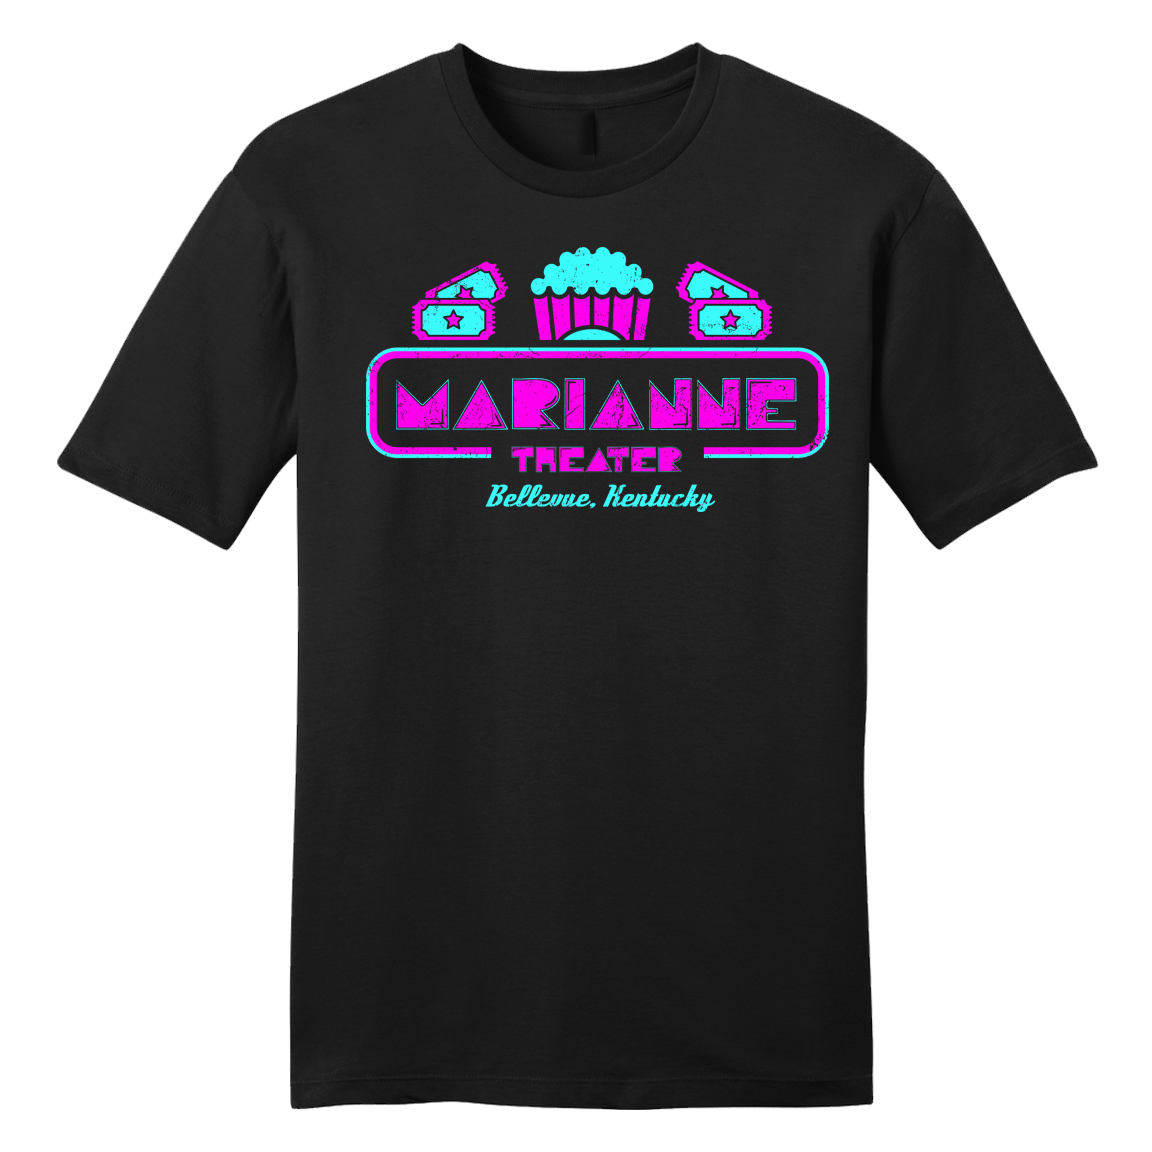 Marianne Theater - Cincy Shirts